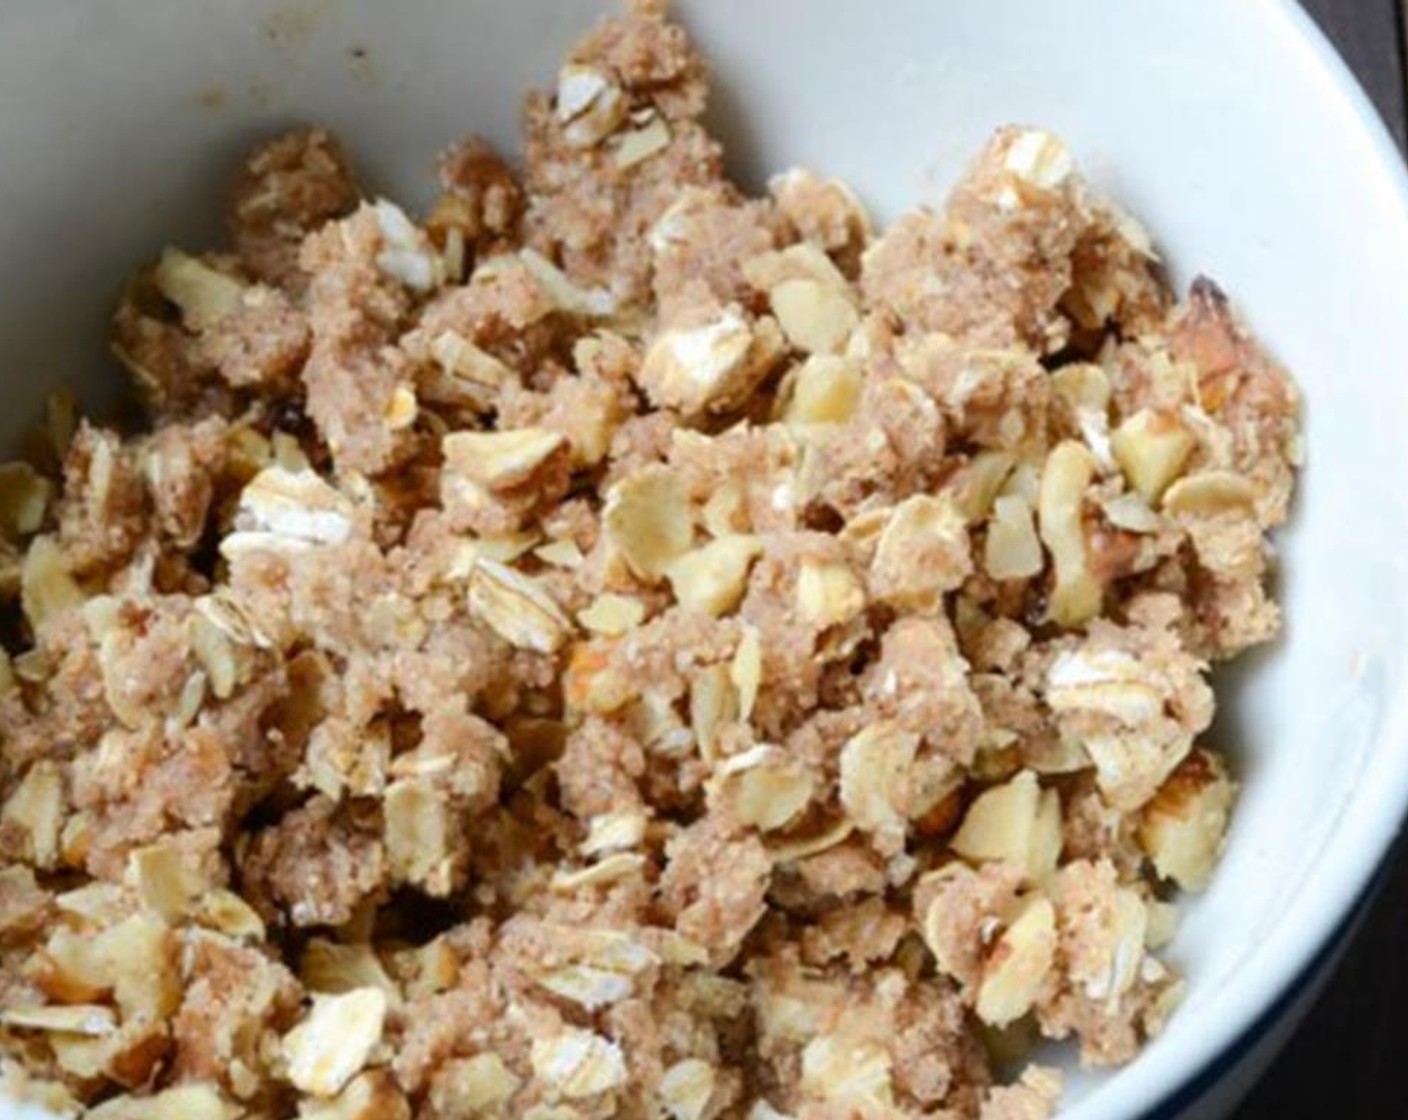 step 3 Mix together with your fingertips until butter is incorporated into the dry ingredients. Add Old Fashioned Rolled Oats (1/4 cup) and Walnut (1/4 cup) and mix thoroughly to combine. Set aside.